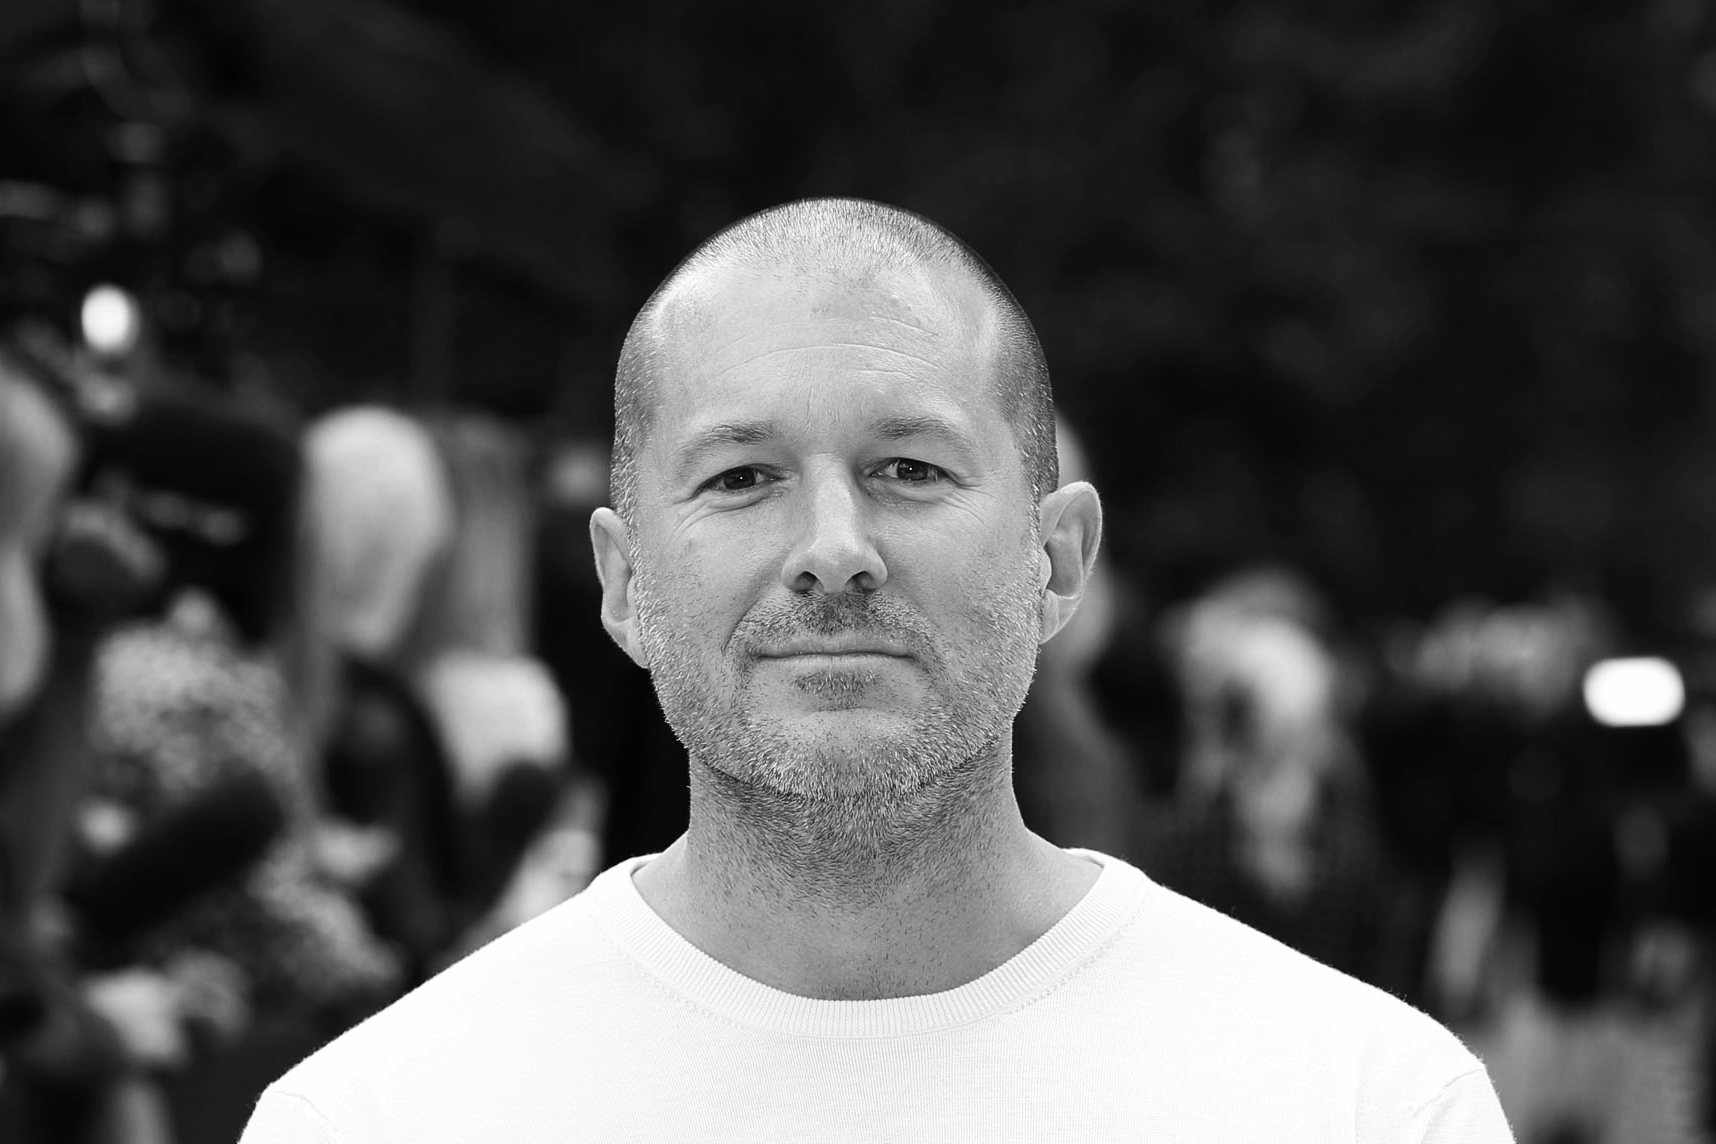 Jonathan Ive attends the front row for the Burberry Prorsum show on day 4 of London Fashion Week Spring/Summer 2013 on September 17, 2012 in London. (Mike Marsland&mdash;WireImage/Getty Images)